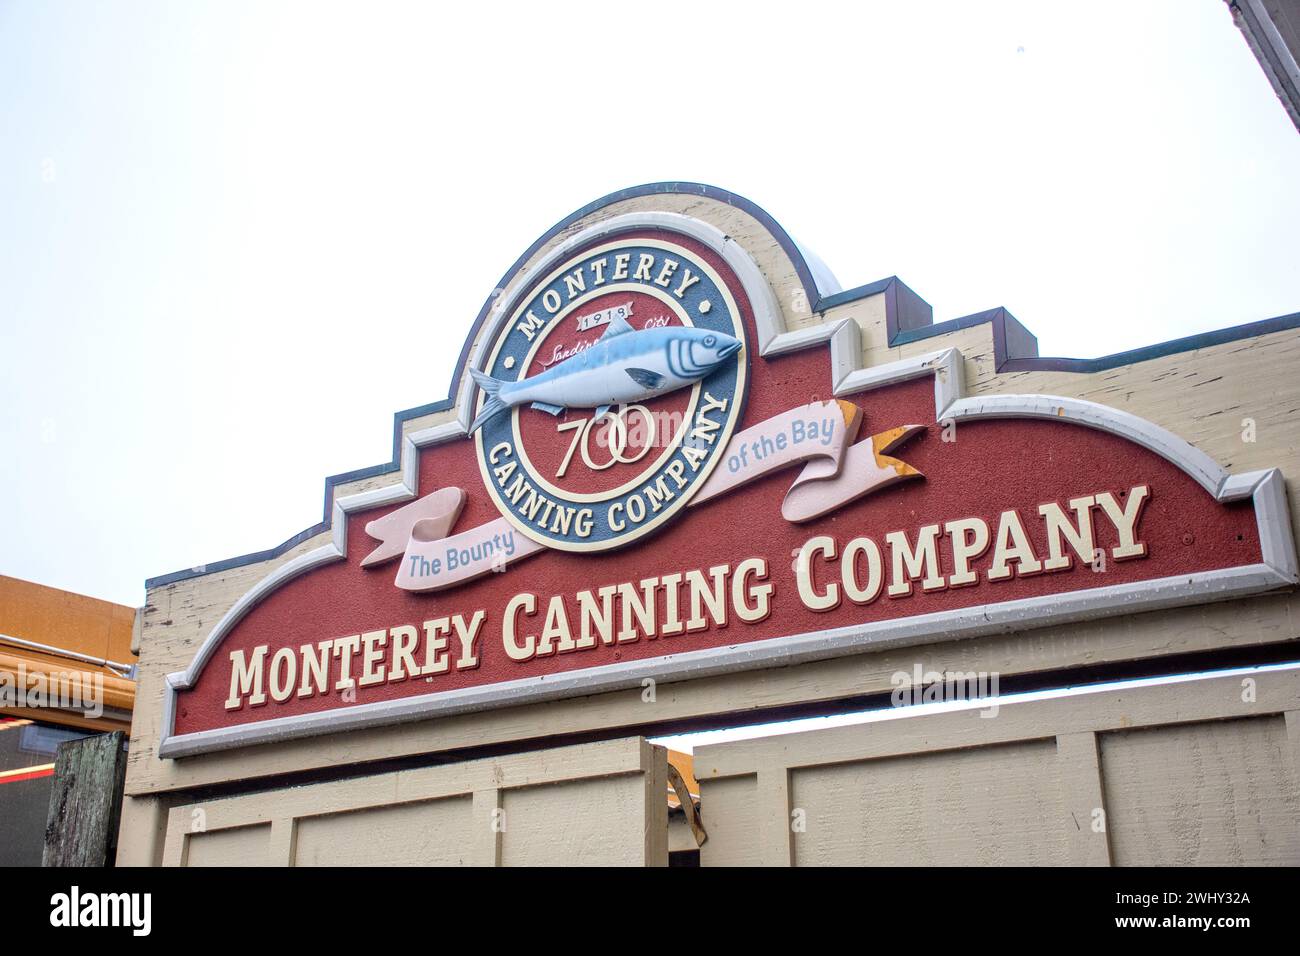 Monterey Canning Company sign, Cannery Row, New Monterey, Monterey, California, United States of America Stock Photo